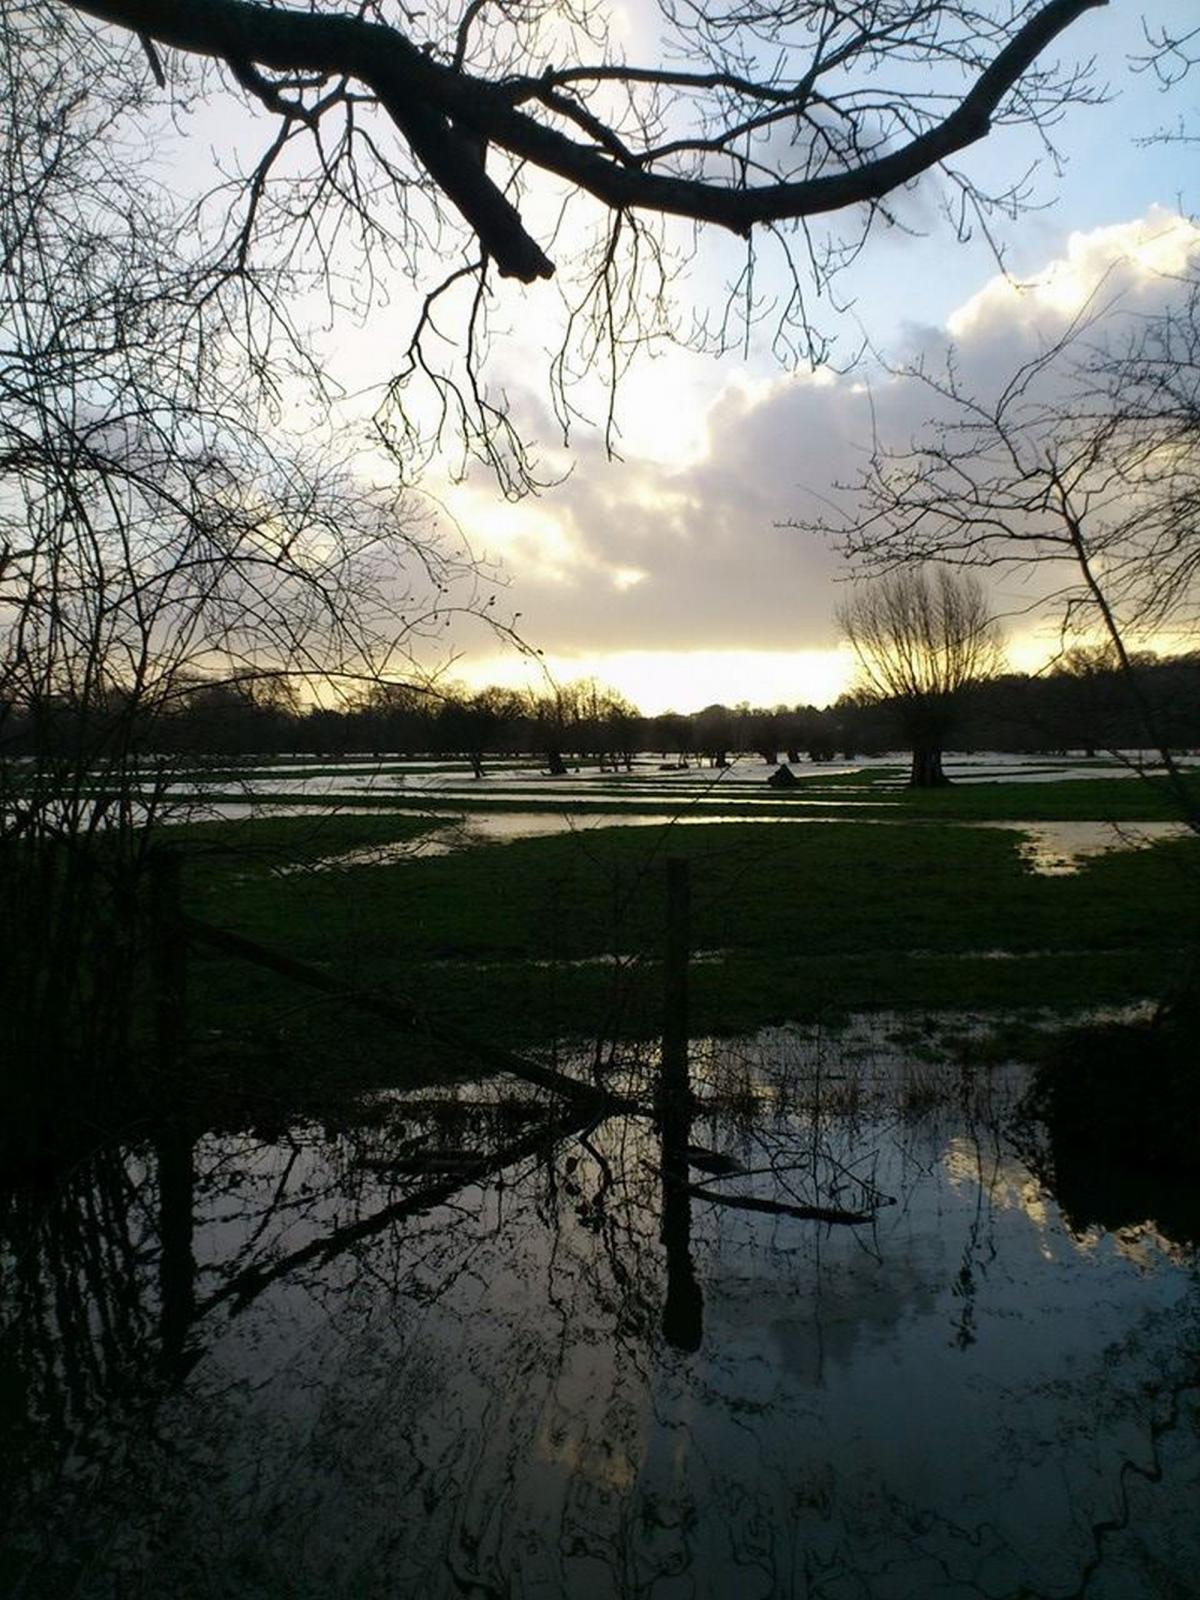 Penny Davies sent this picture of flooded fields.